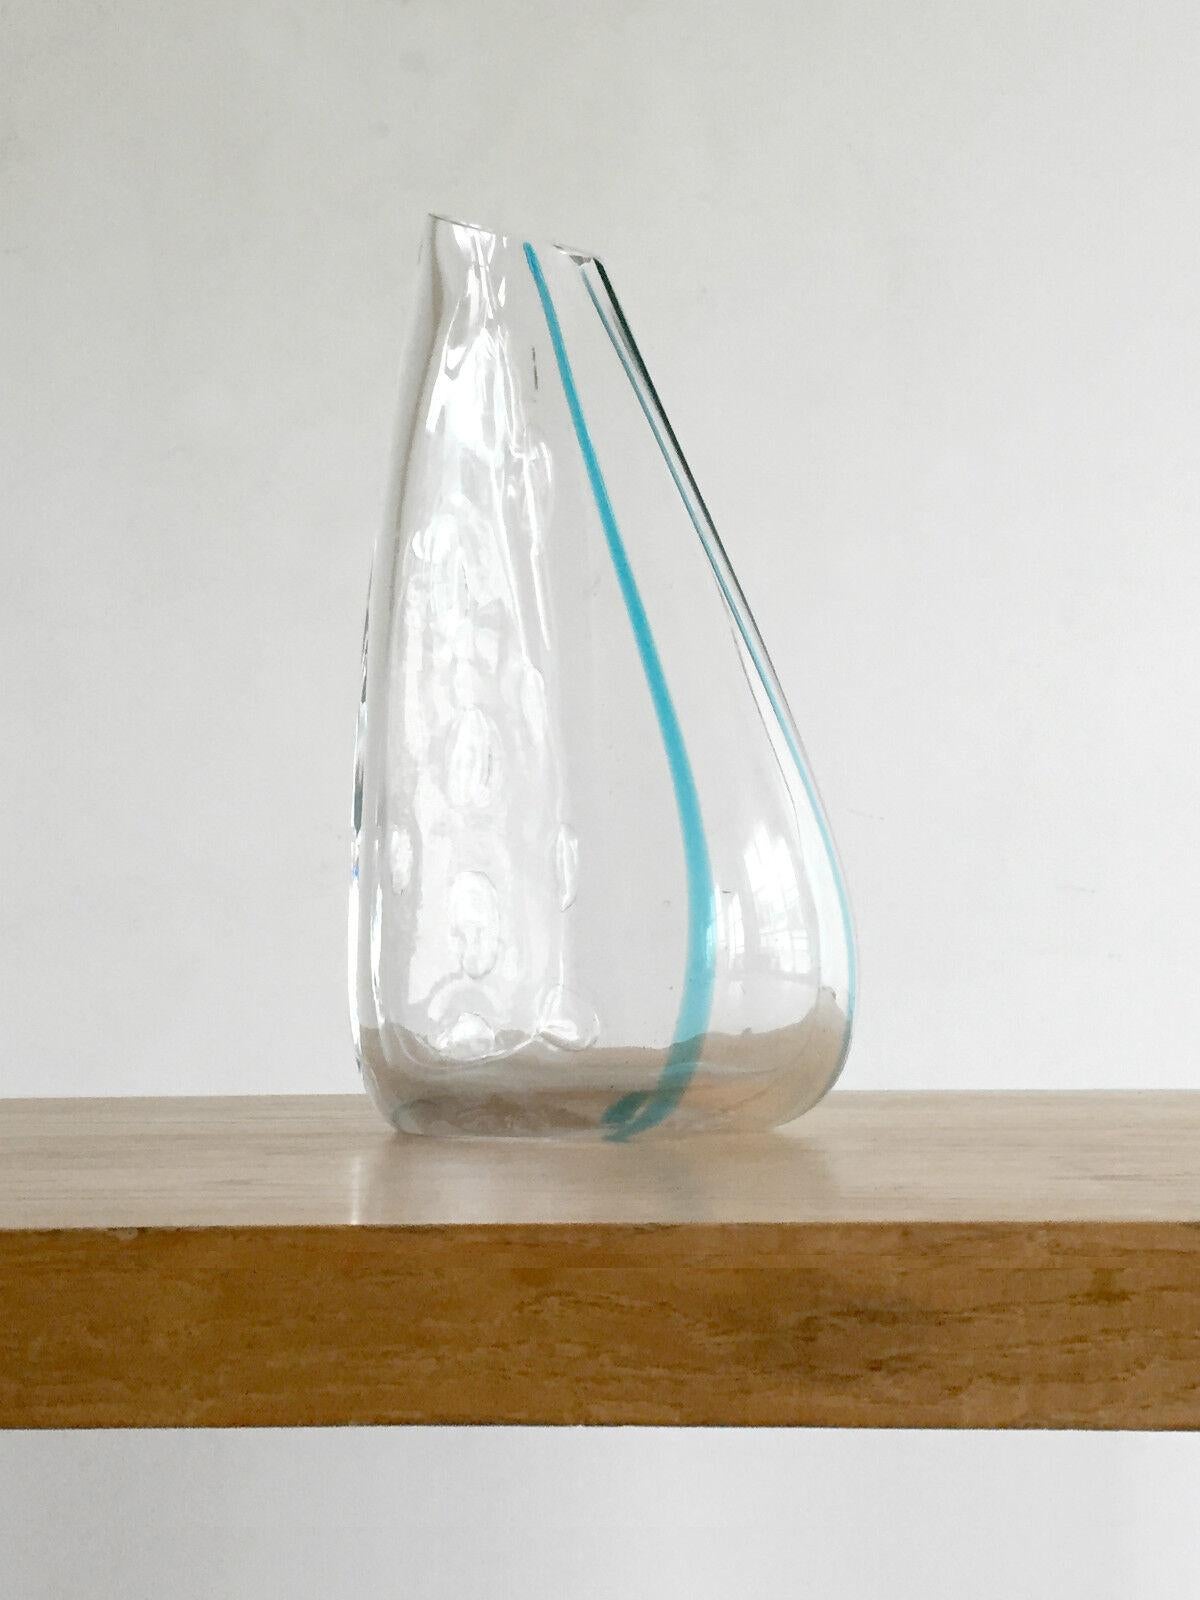 An enormous and sculptural Post-Modernist vase, Free Form, in thick blown glass with ovoid bubbles and 2 turquoise lines, Venini, Murano, Italy 1980-1990.